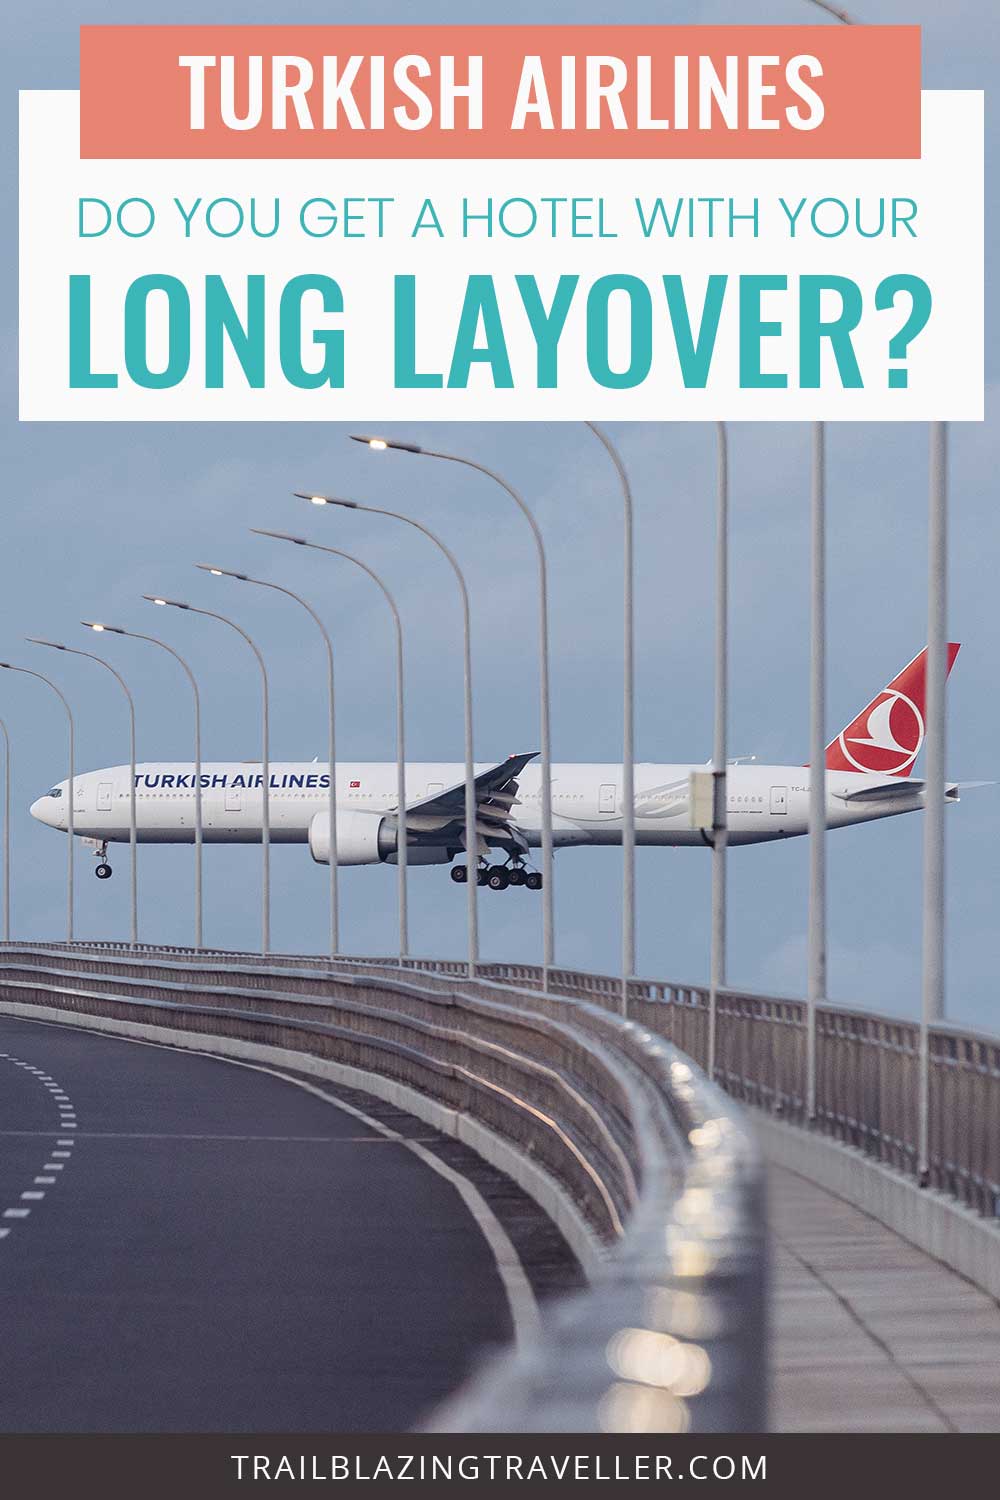 A plane can be seen from a bridge - Turkish Airlines – Do You Get a Hotel with Your Long Layover